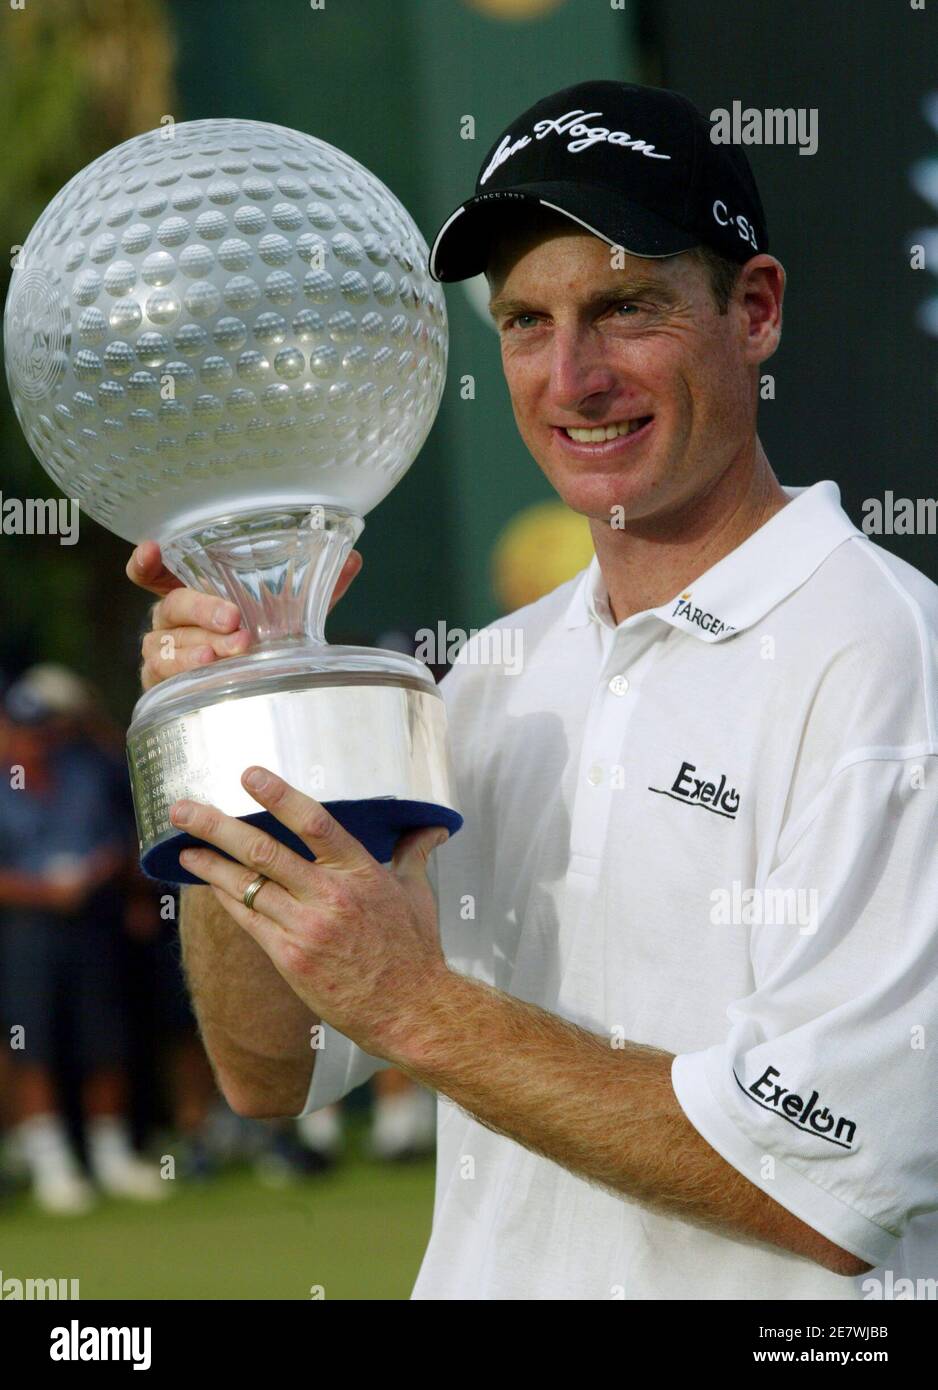 Jim Furyk of the U.S. holds the champions trophy after winning the Sun City Golf Challenge in Sun City, South Africa December 4, 2005. Furyk chipped in on the second extra hole of a sudden-death playoff to win the 25th Sun City Golf Challenge on Sunday. Furyk's birdie from 15-feet from the back of the par-four 18th green beat off Briton Darren Clarke and Australia's Adam Scott for the $1.2 million first prize. REUTERS/Juda Ngwenya Stock Photo